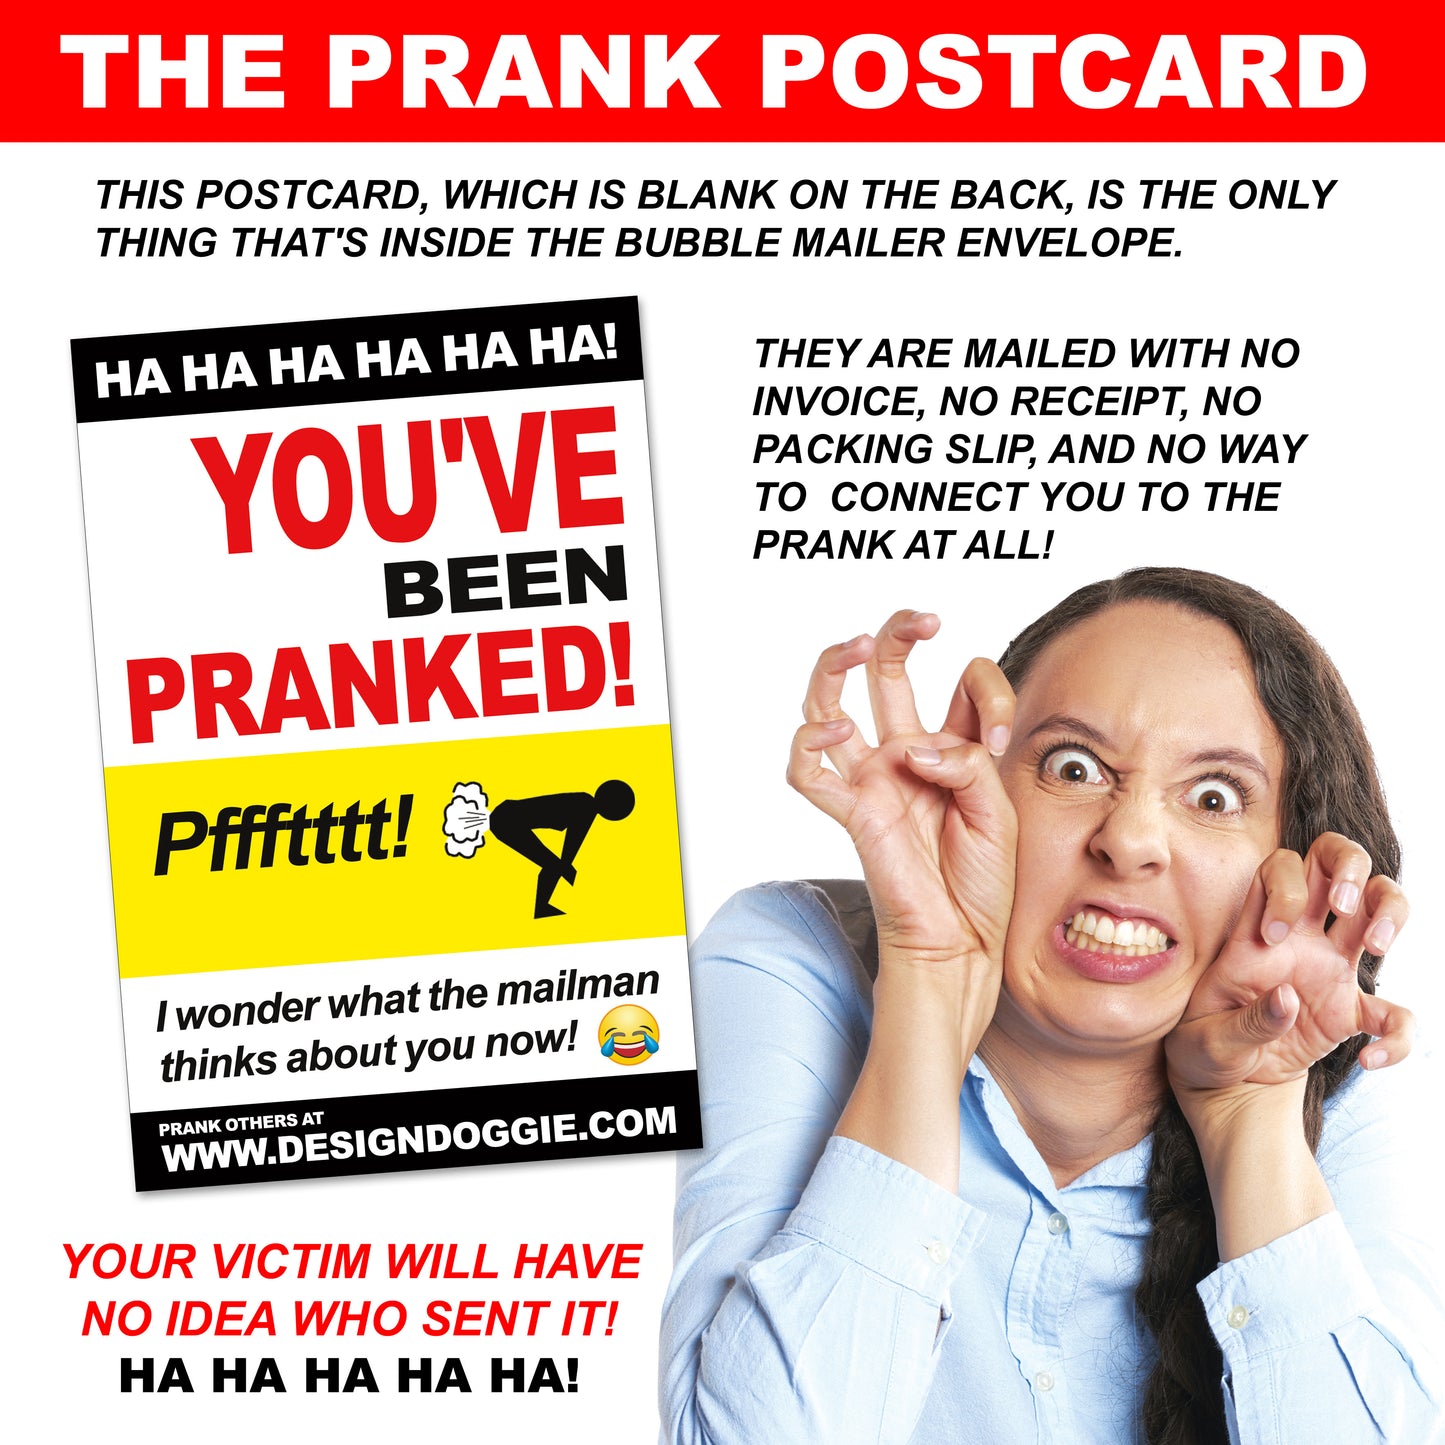 Hot Dog Eating Contest embarrassing prank envelope gets mailed directly to your victims 100% anonymously!